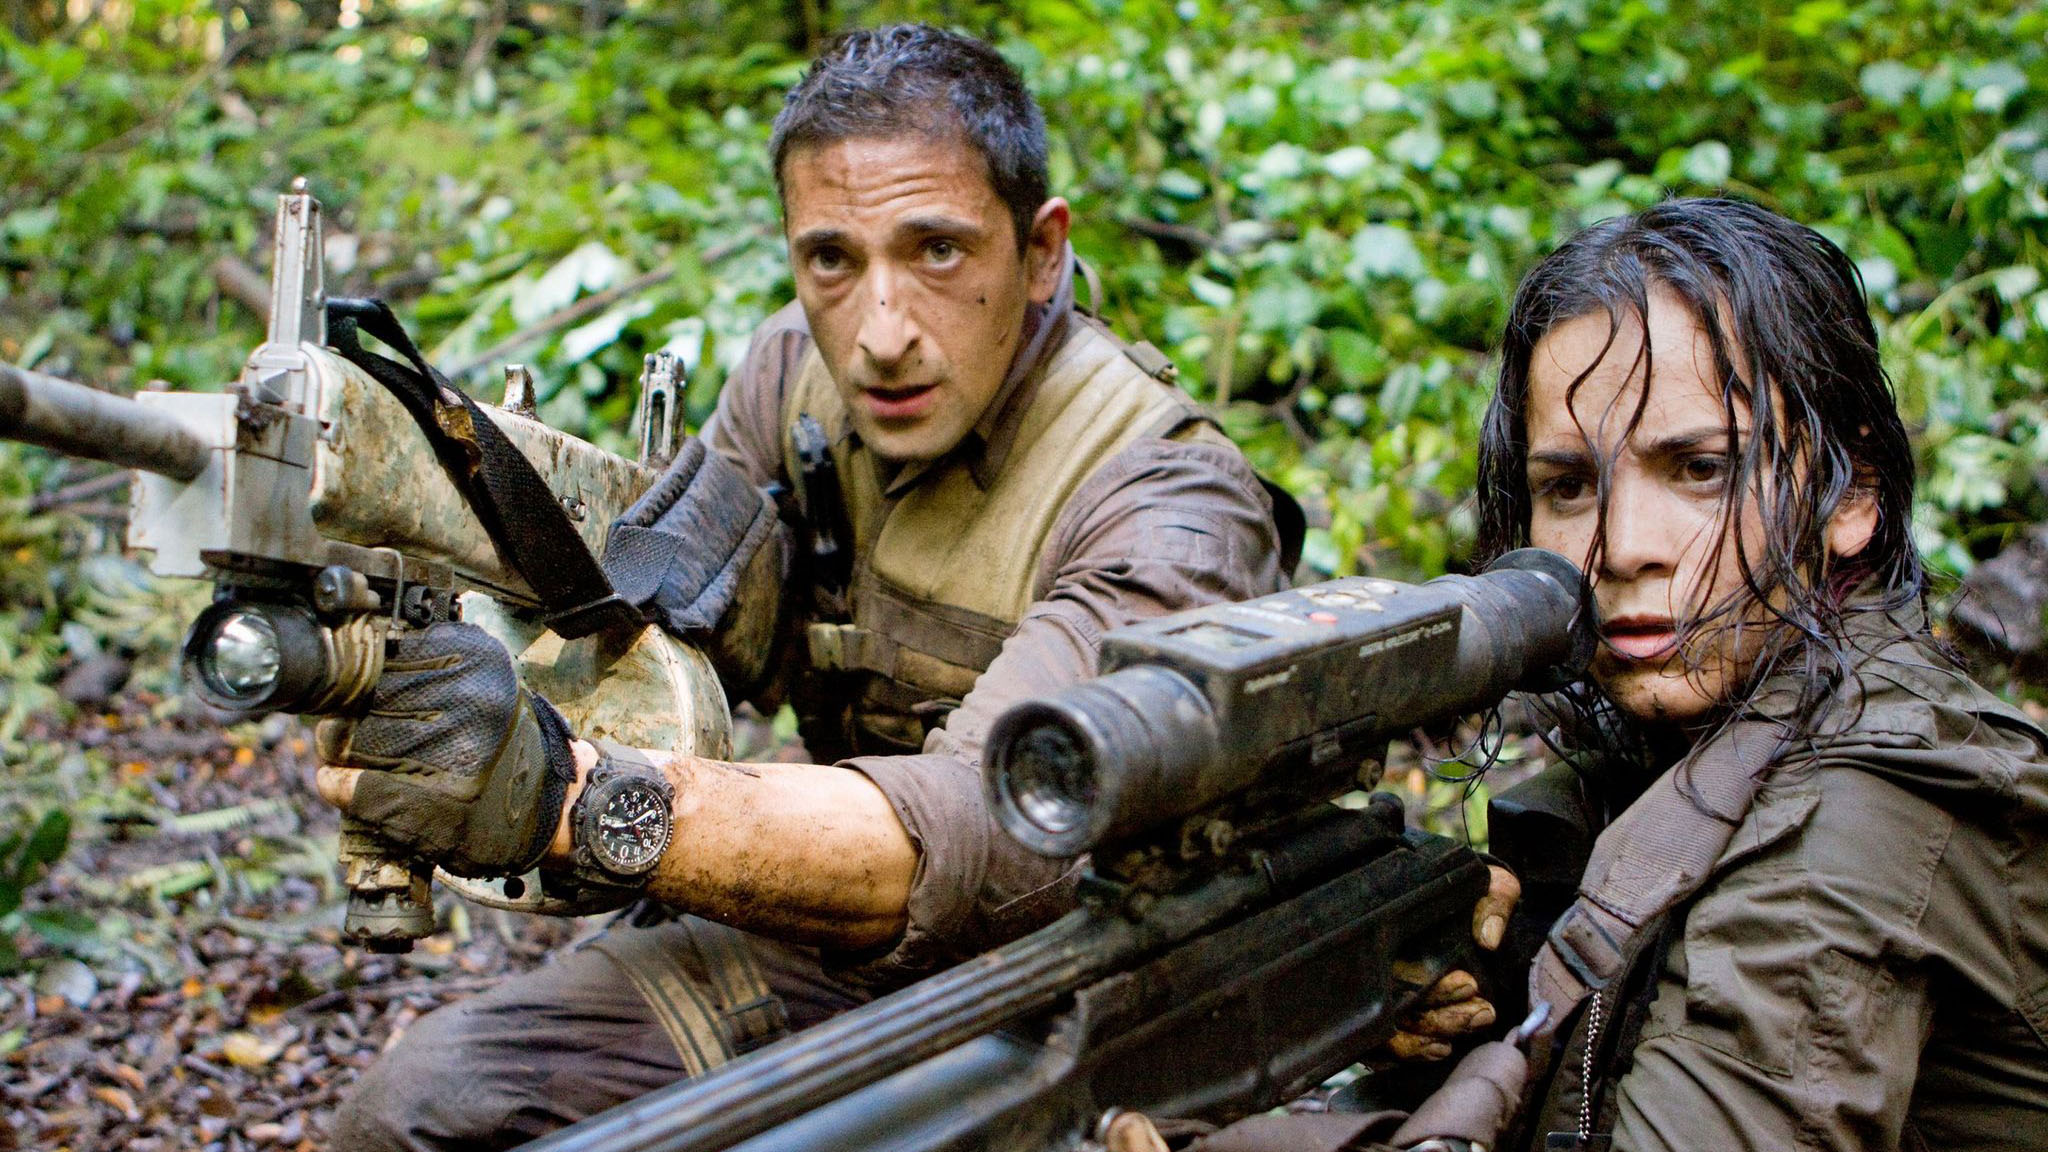 A still from the movie Predators in which Adrien Brody as Royce and Alice Braga as Isabelle hide in the jungle with guns